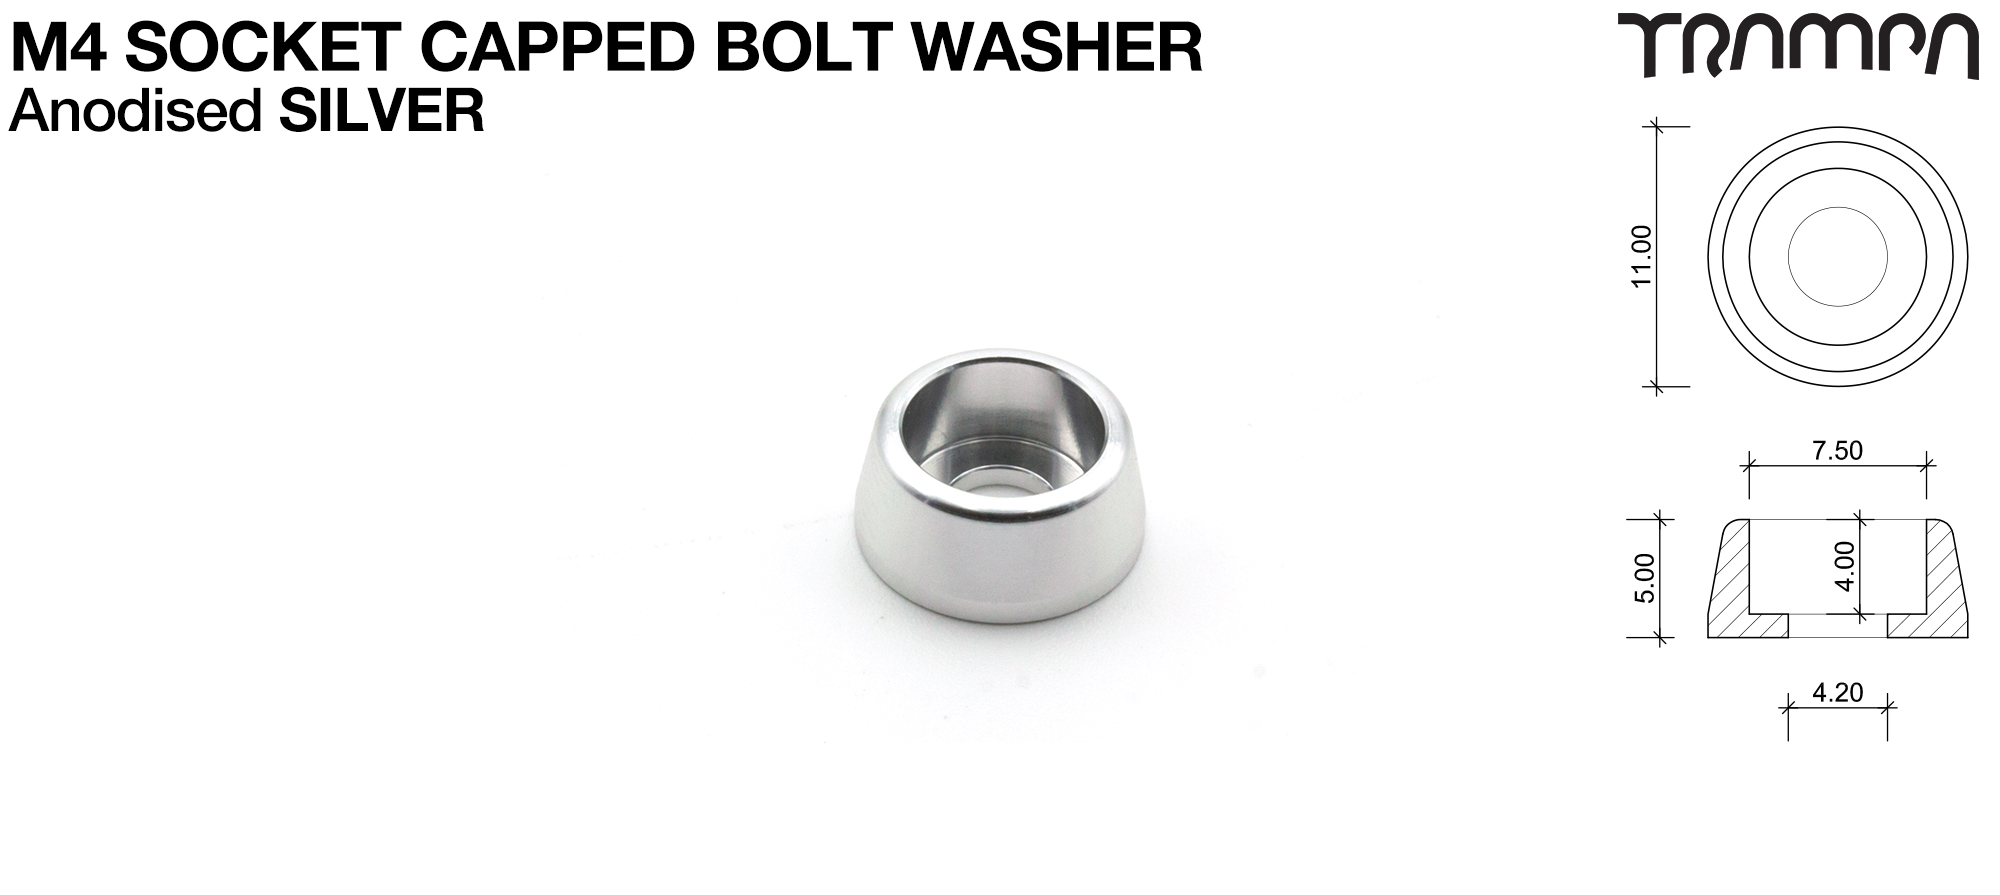 M4 Socket Capped Washer - Anodised SILVER